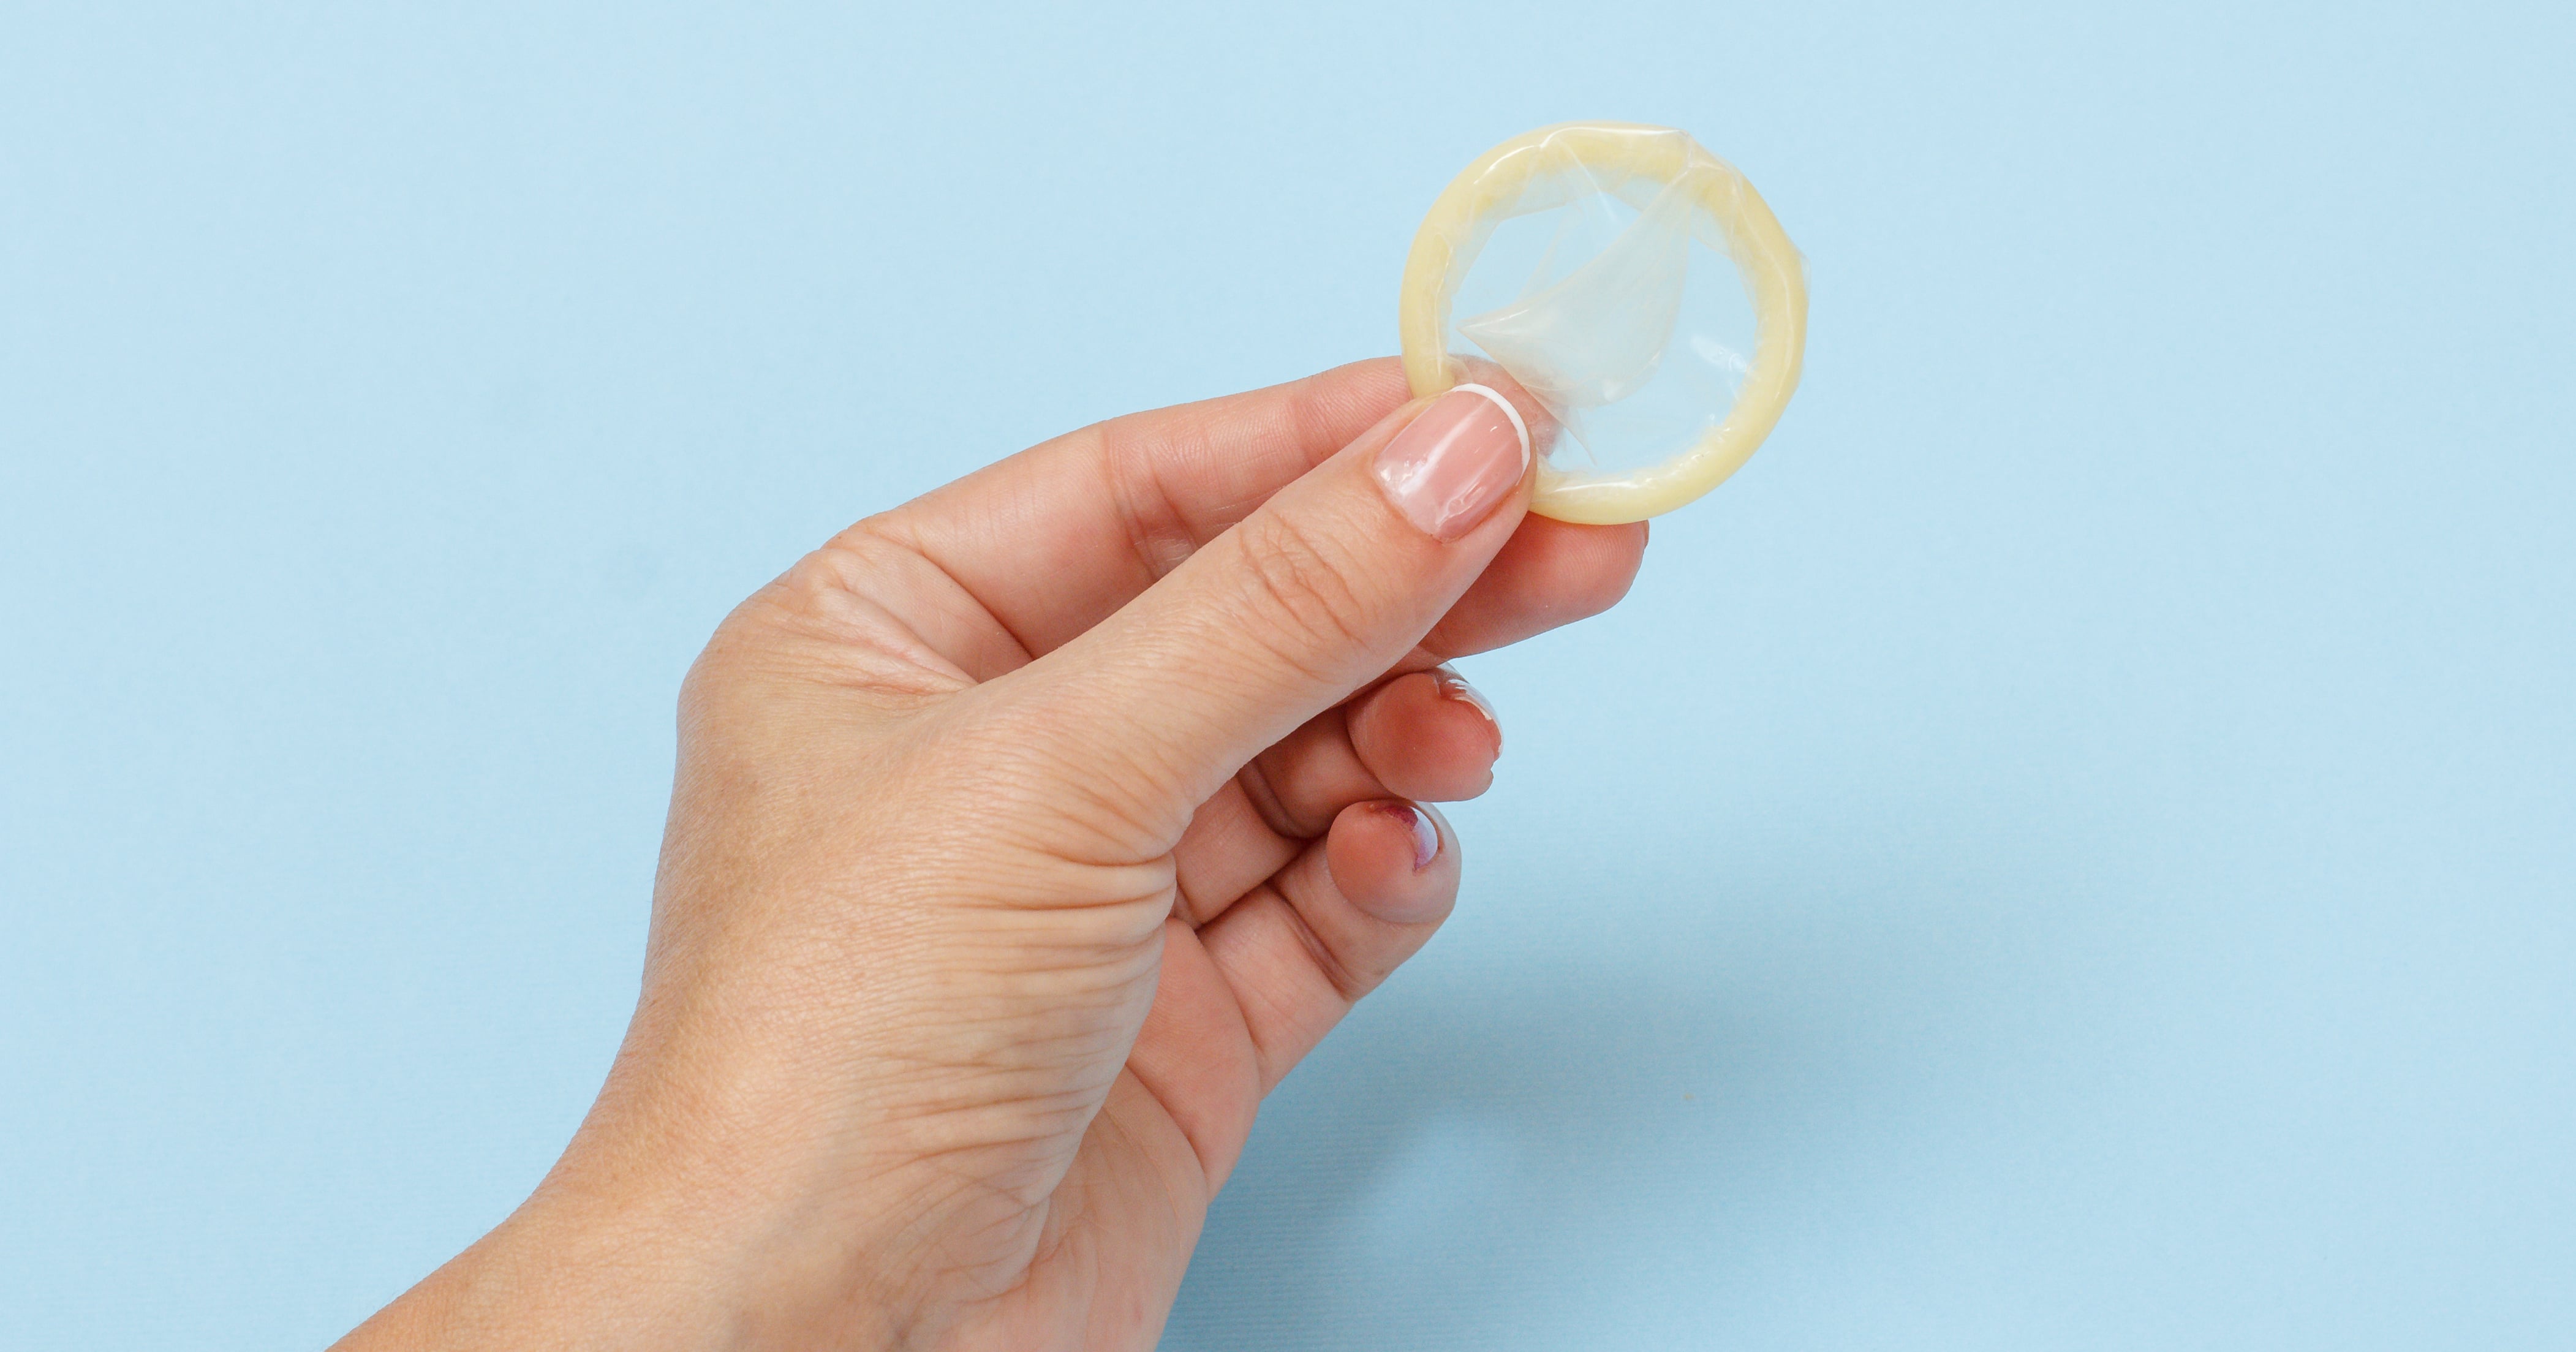 6 Sensational Condoms to Help You Get It On Safely –